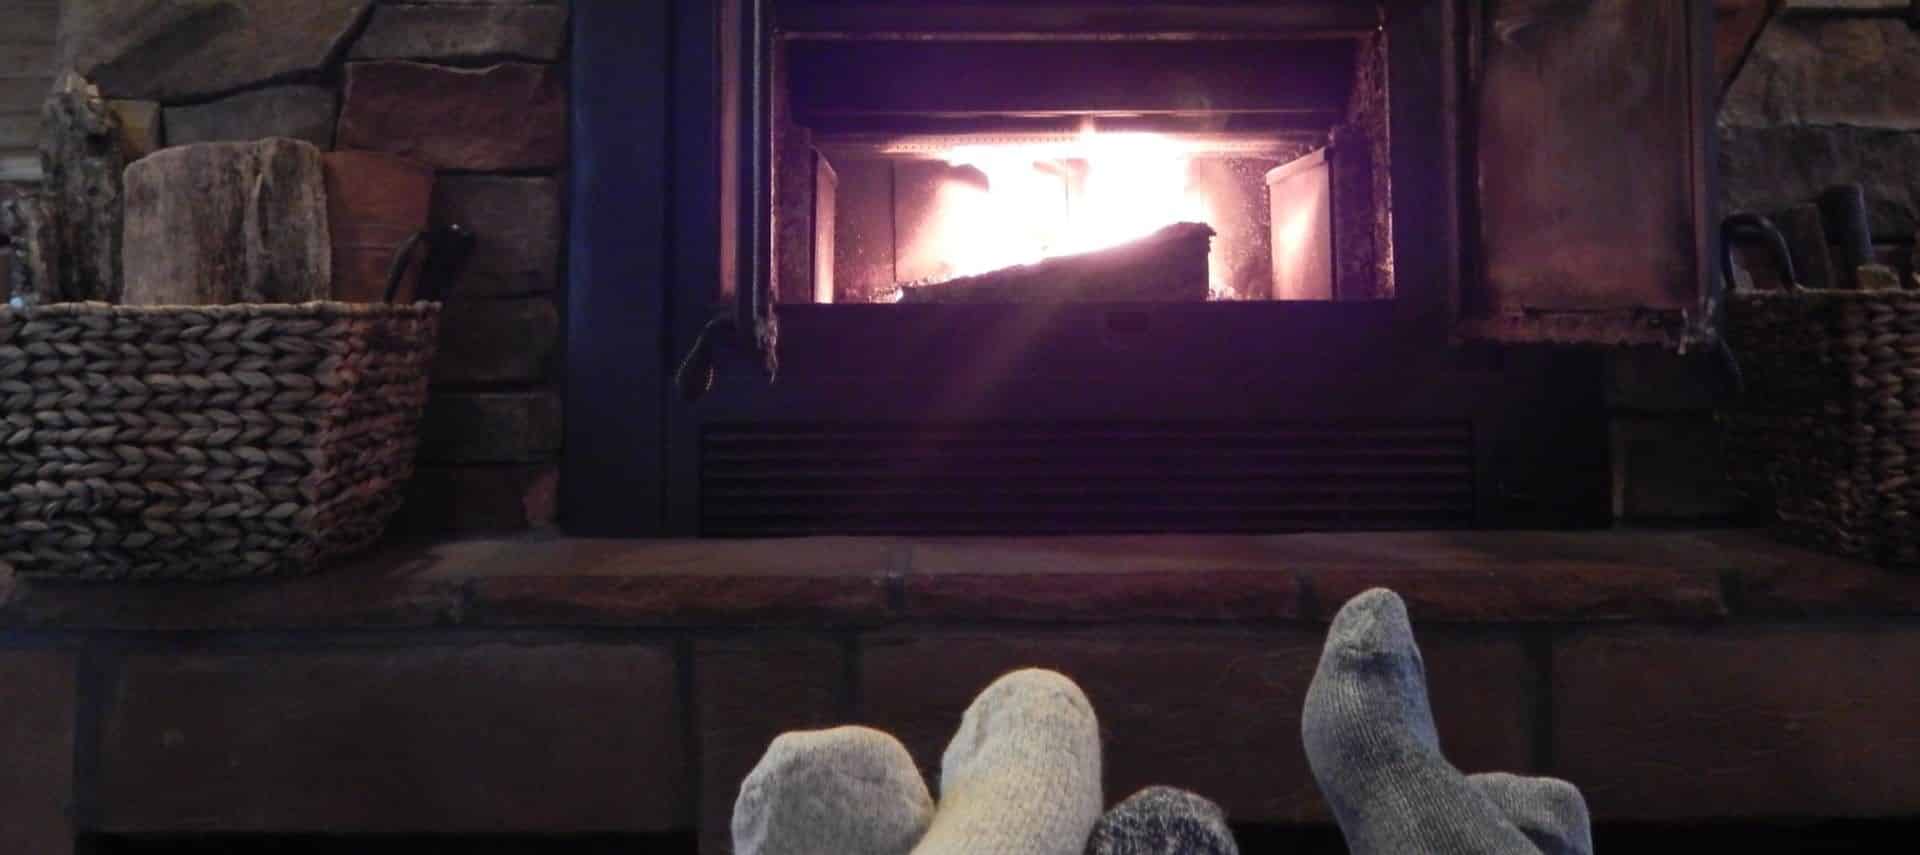 View of a lighted fireplace in the background and some feet in socks near by